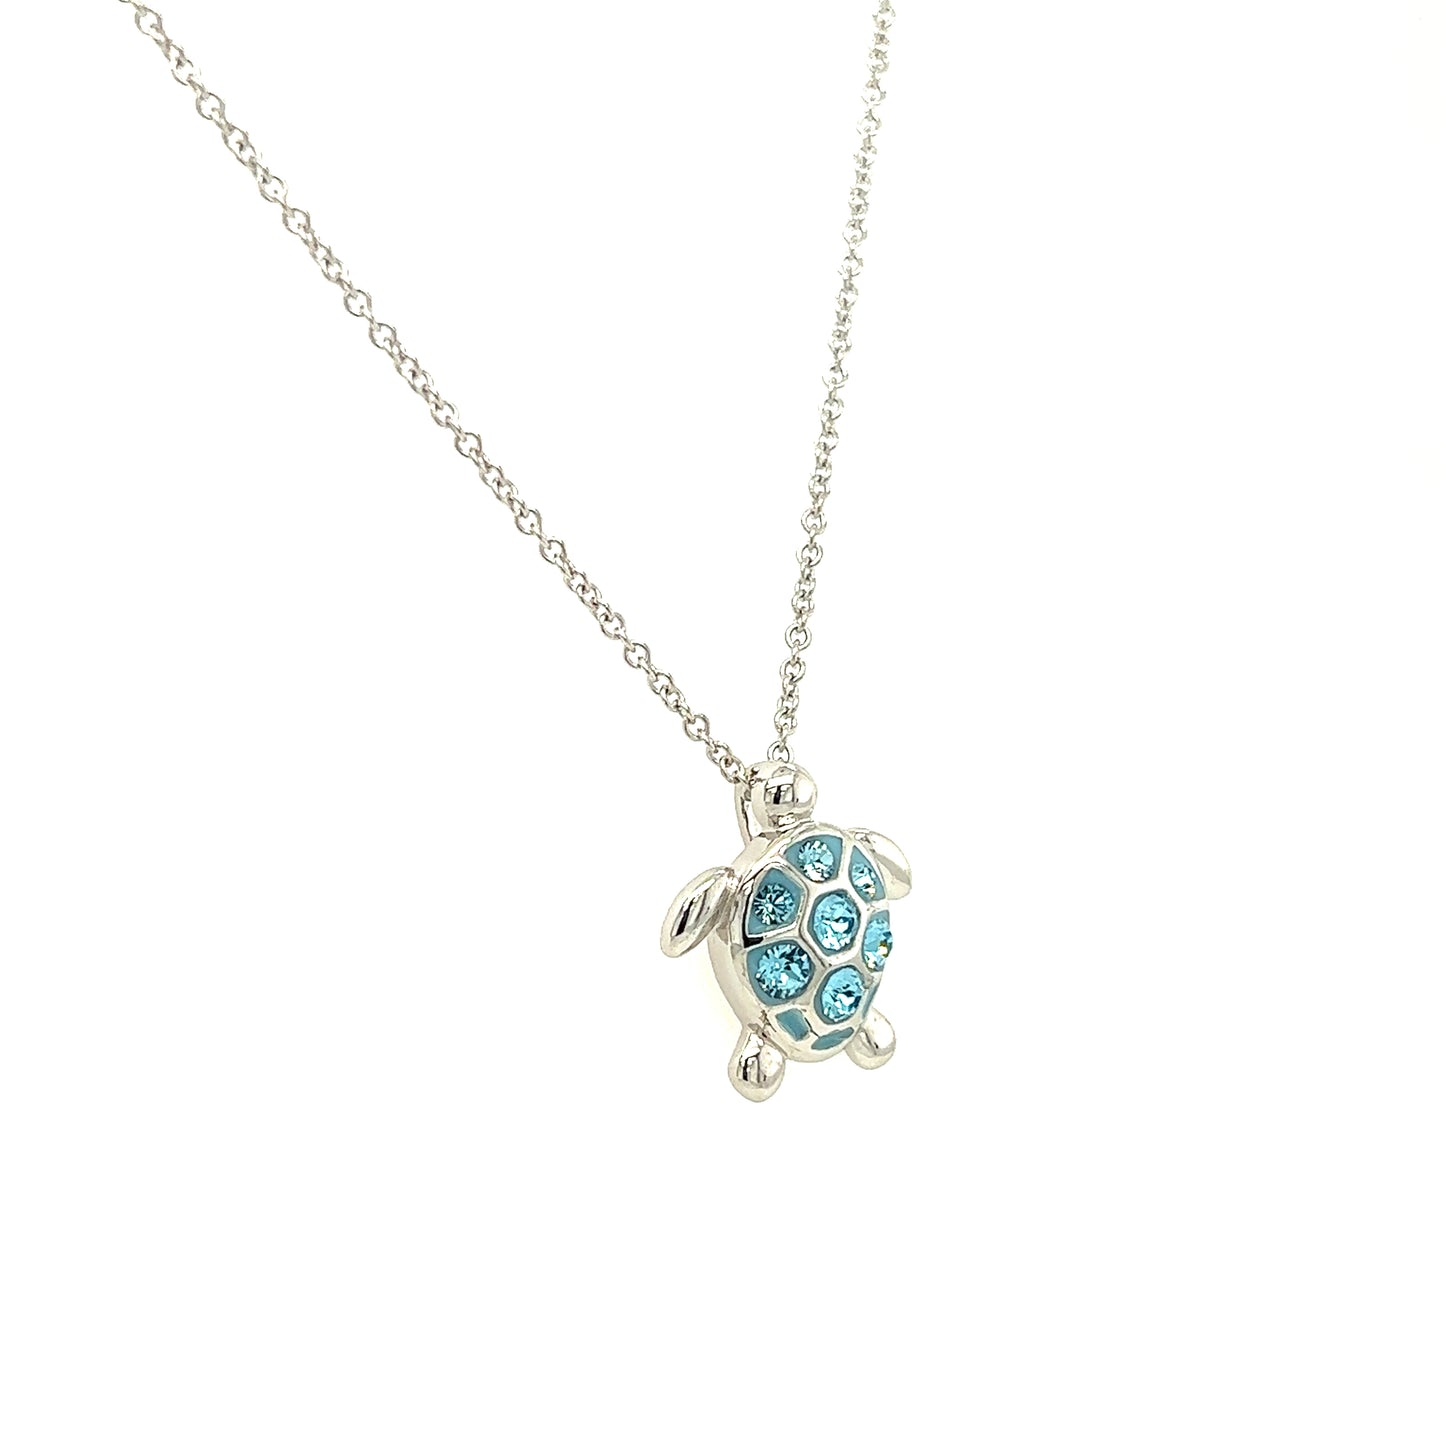 Aqua Sea Turtle Necklace with Aqua Crystals in Sterling Silver Left Side View